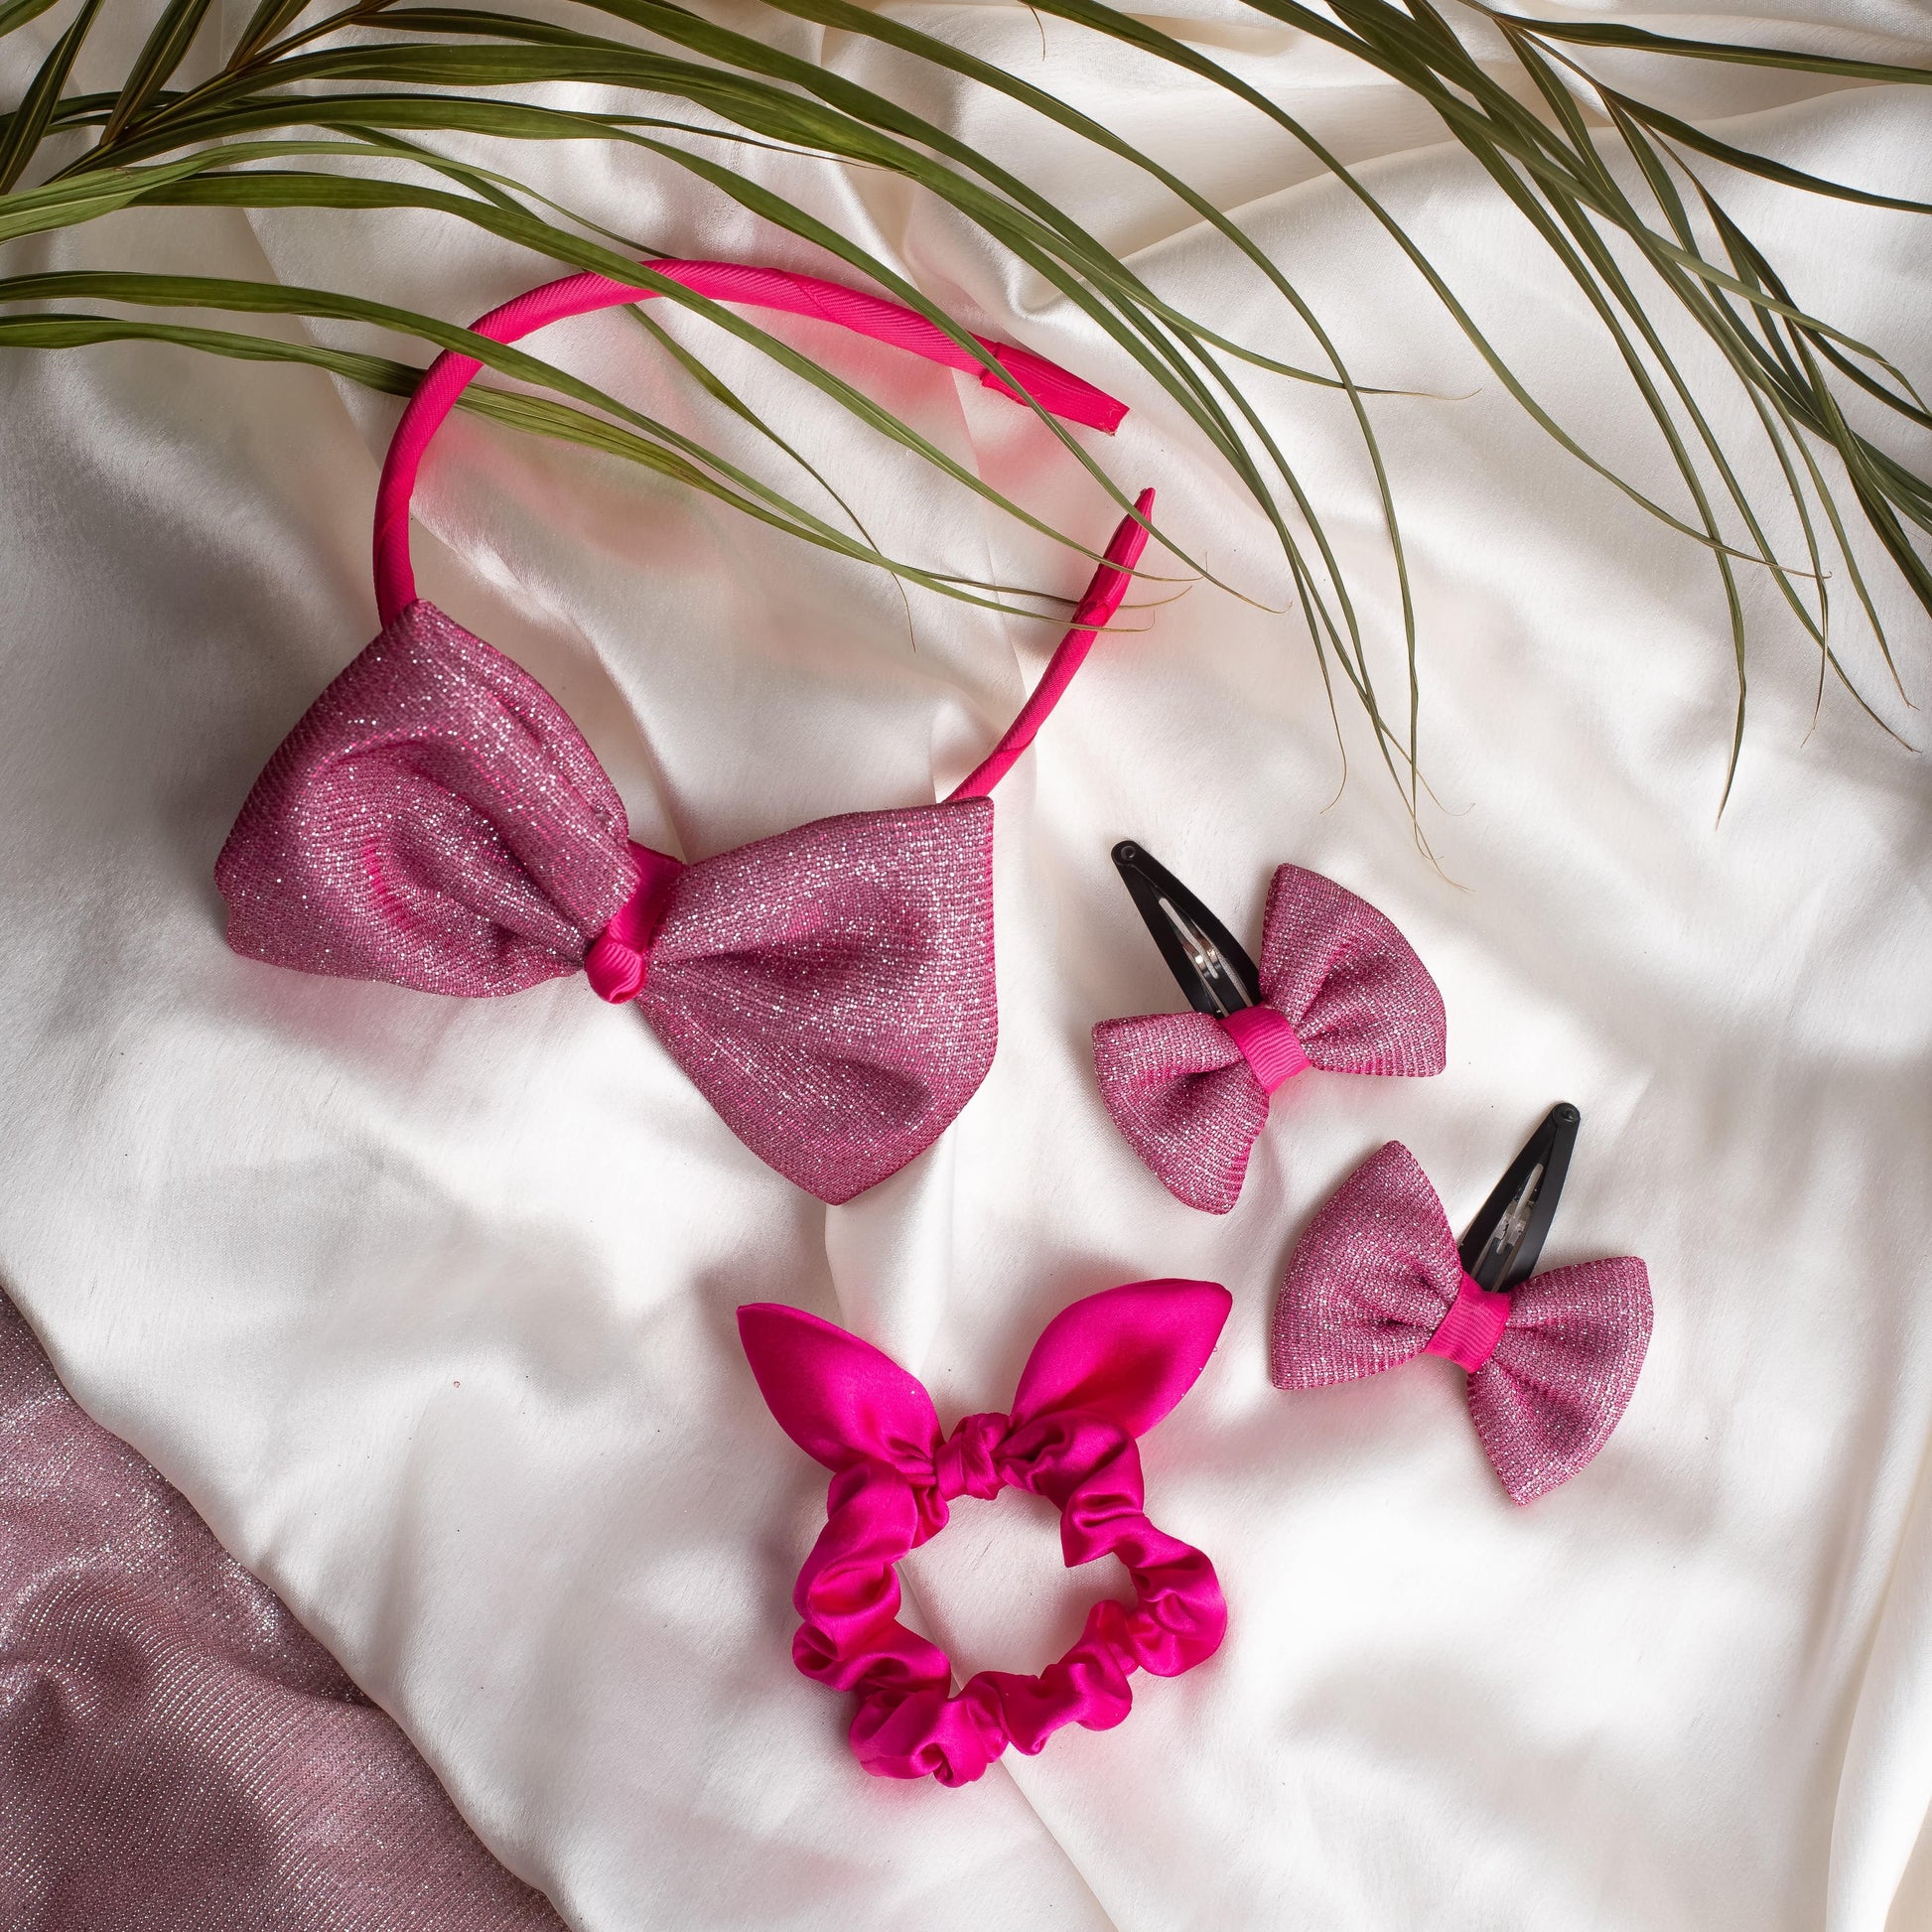 Ribbon Candy- Combo of 1 big bow shiny hairband, 1 pair of shiny bow tic-tac (2 nos), and 1 satin scrunchie with tie knot- Pink